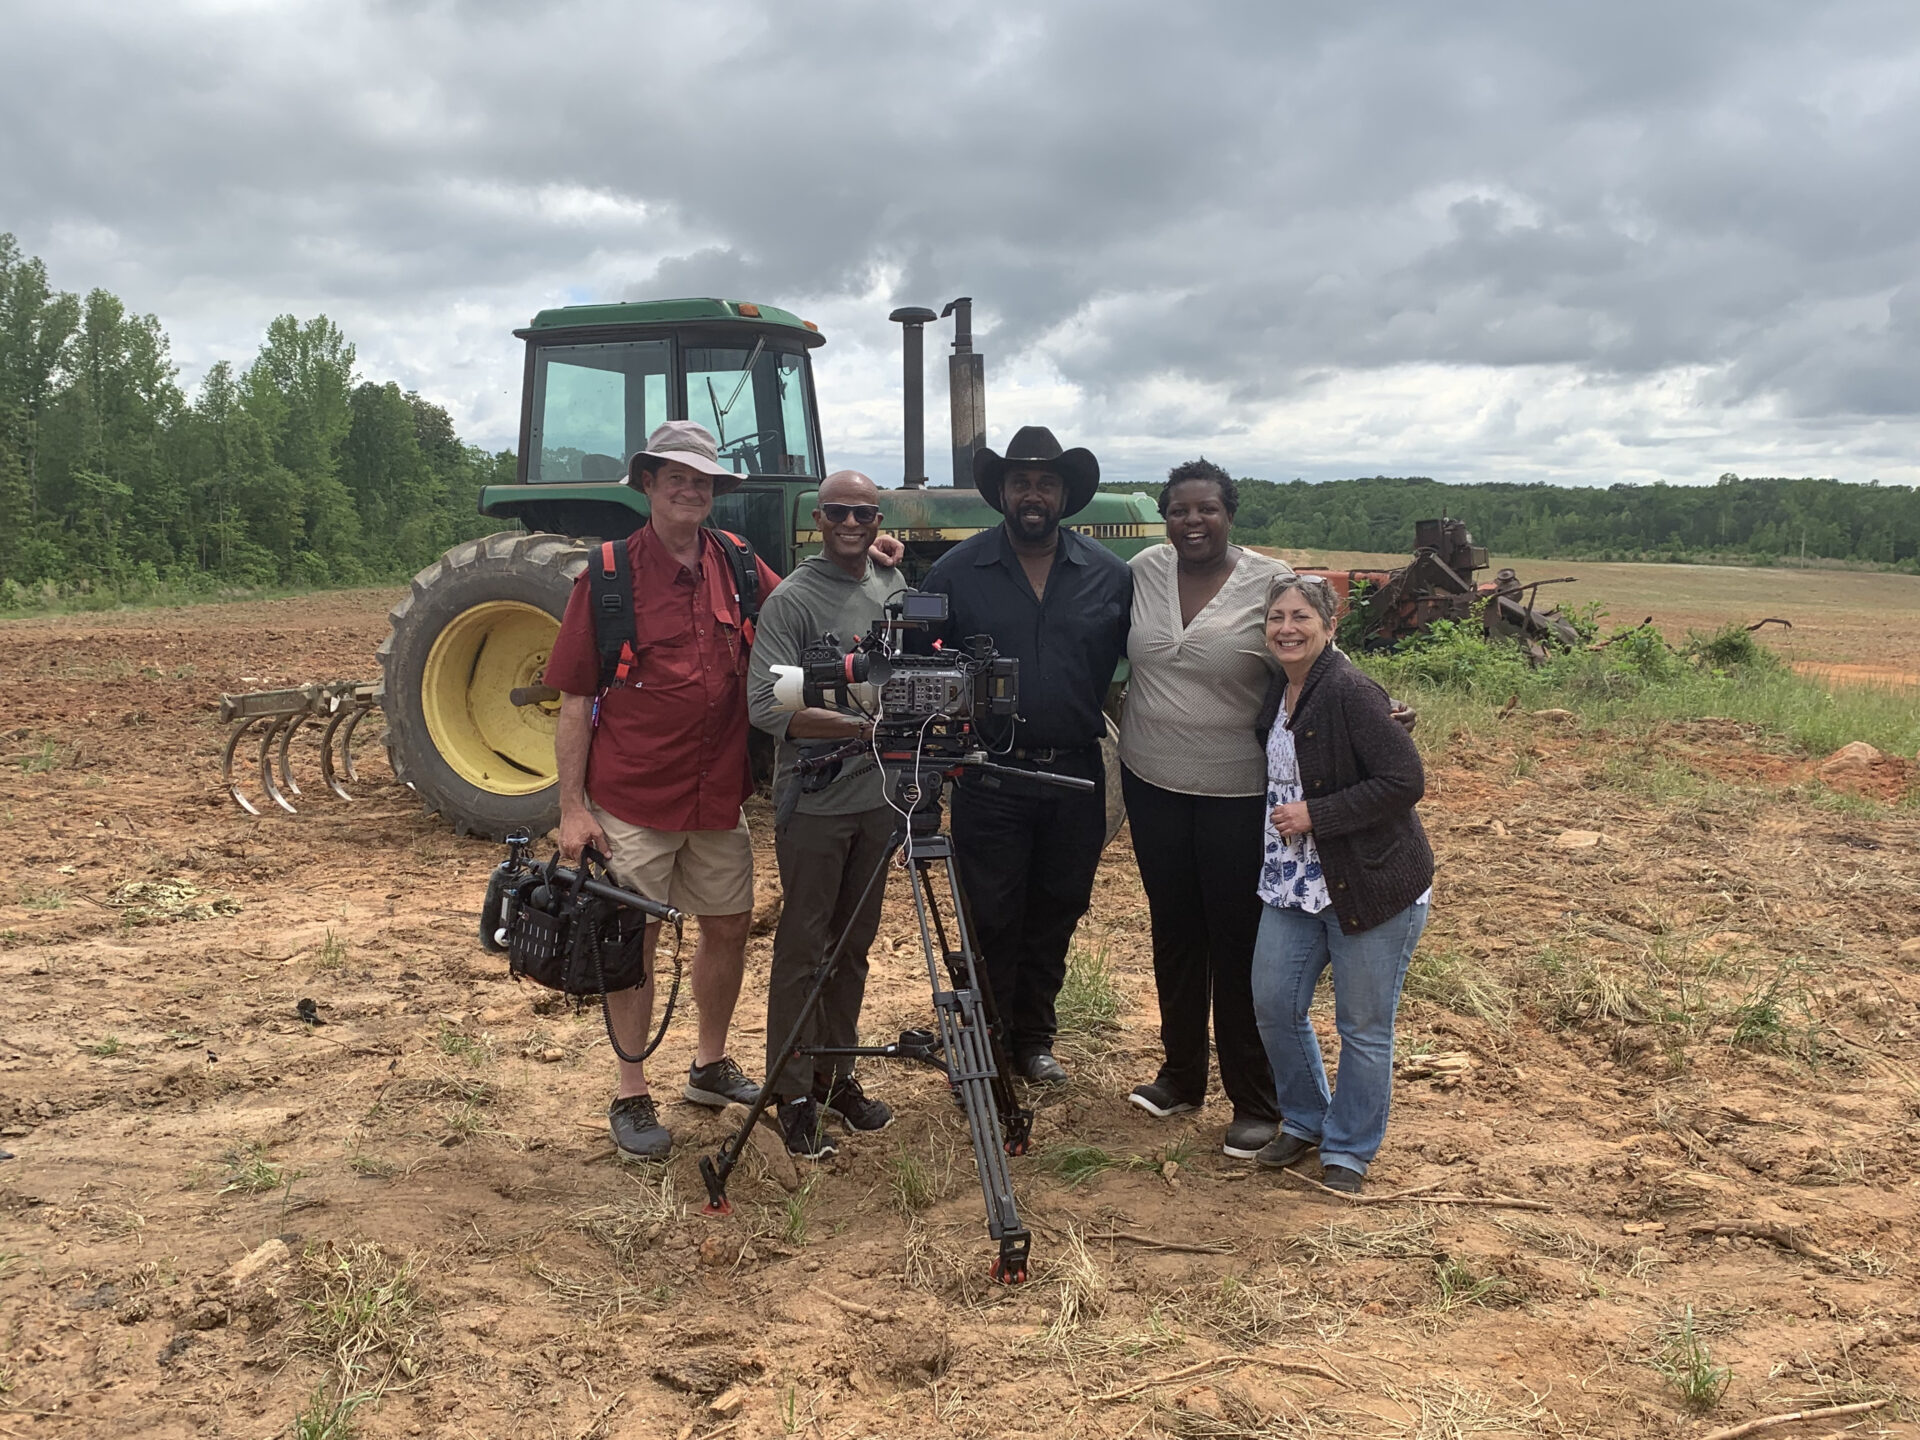 The Cost of Inheritance production crew with President of the Black Farmers Association John Boyd.